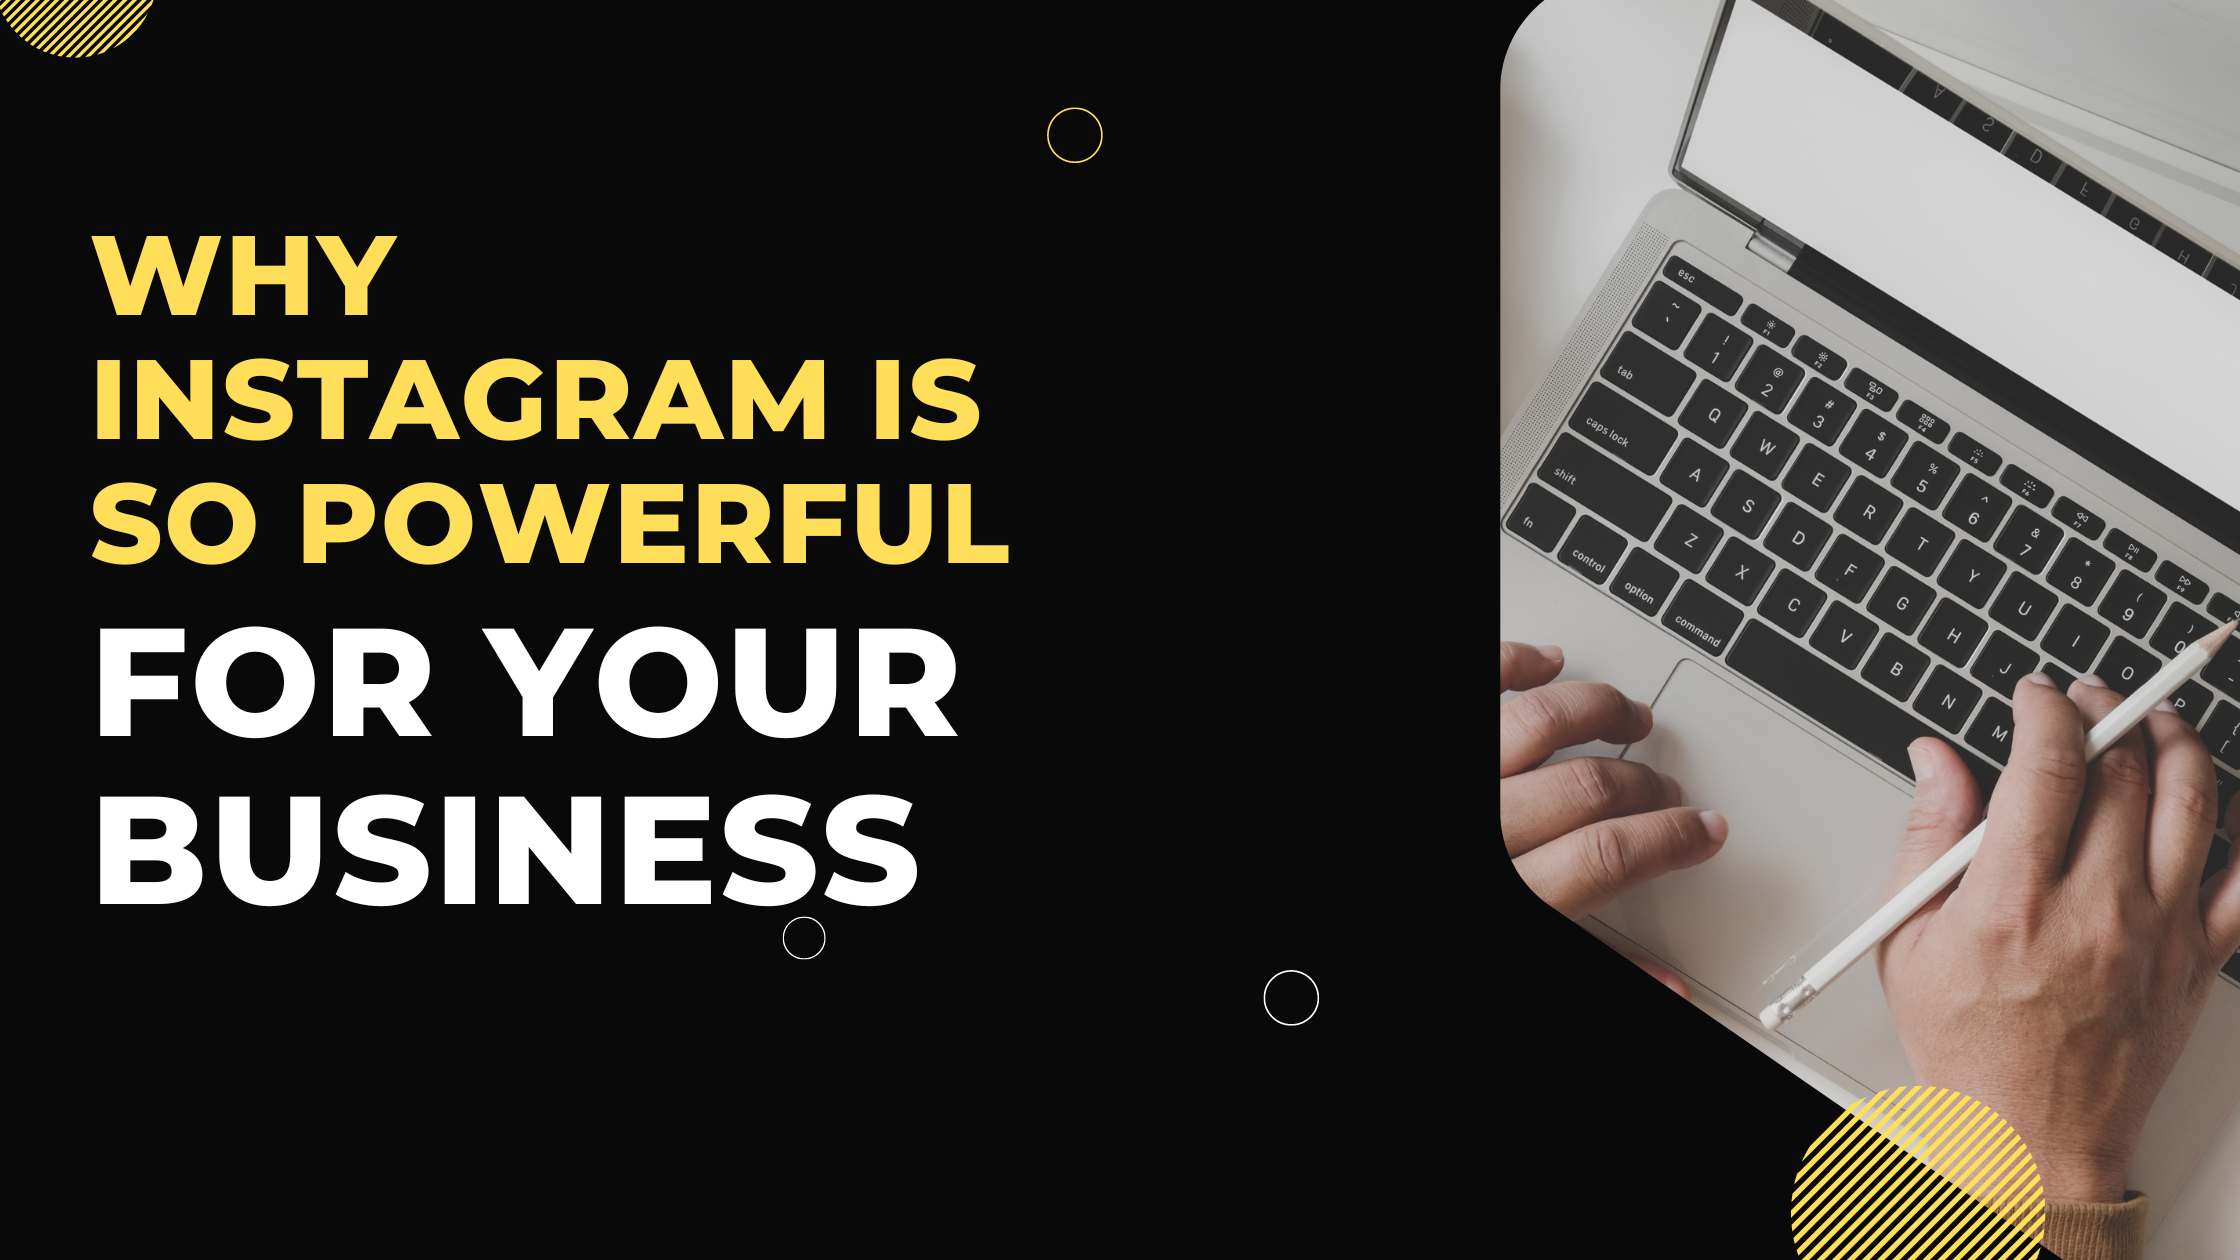 Why Instagram Is So Powerful for Your Business in 2022